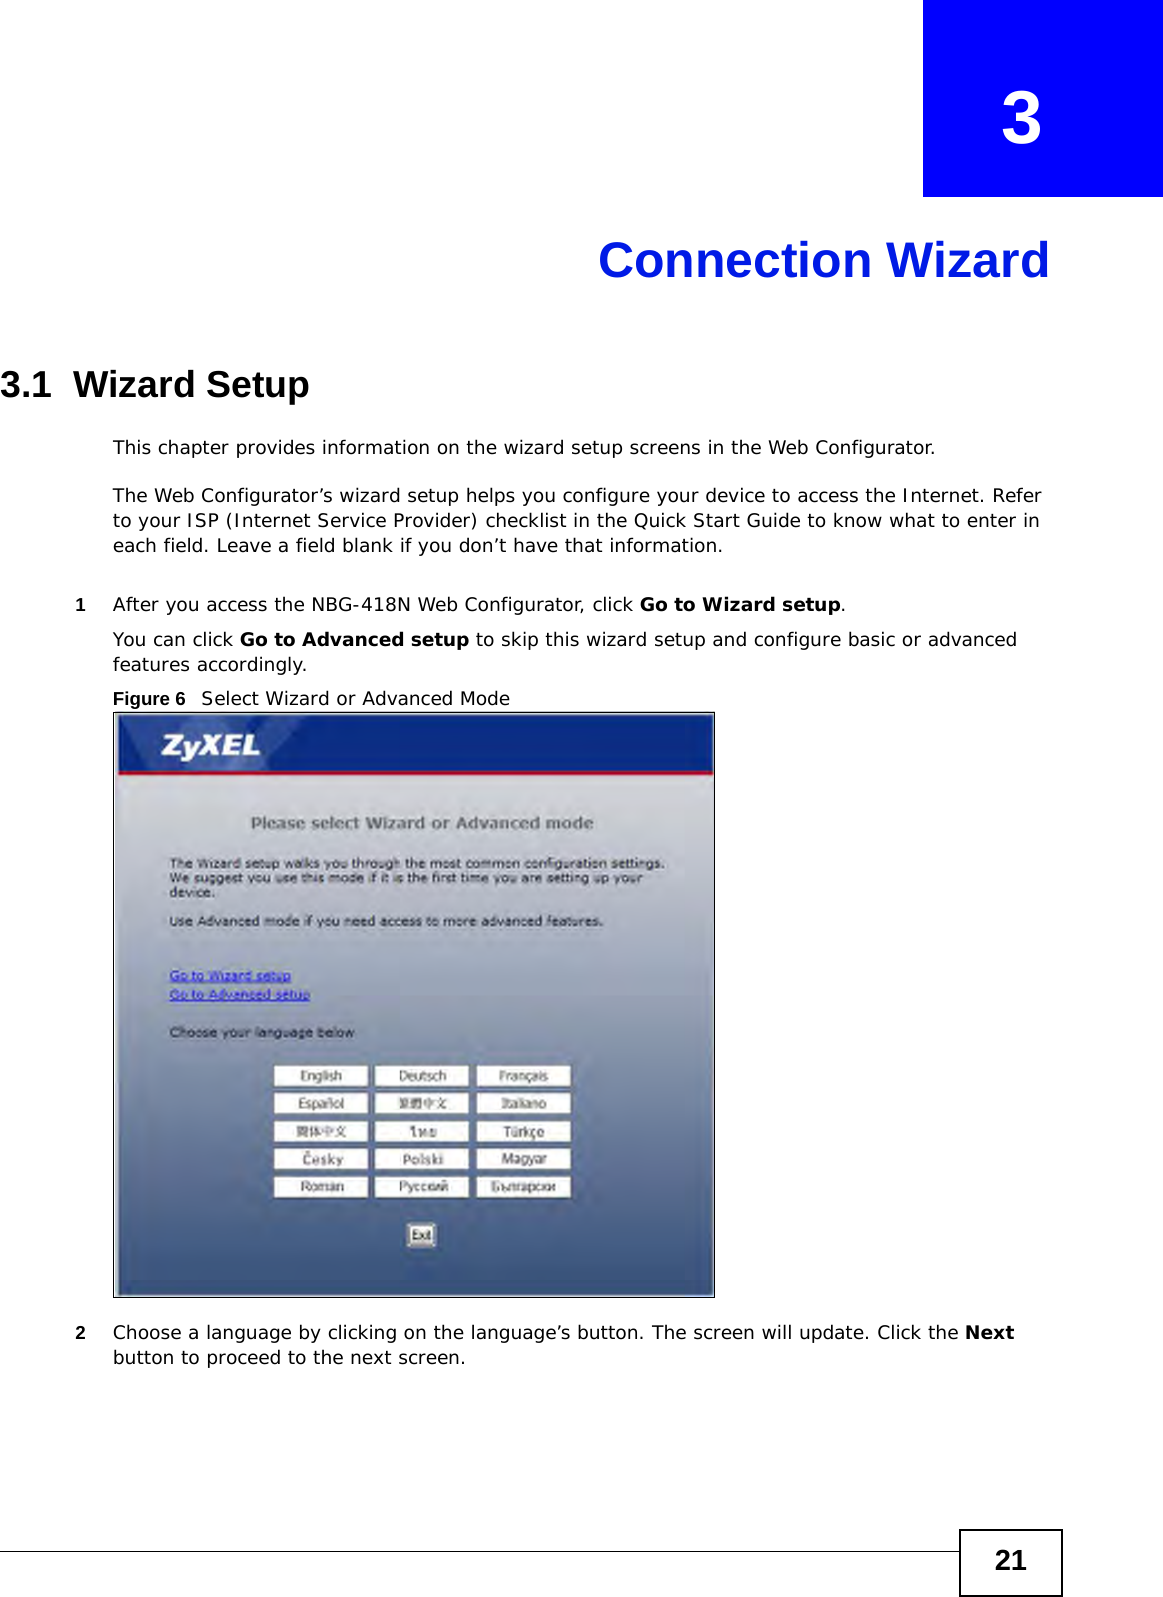 21CHAPTER   3Connection Wizard3.1  Wizard SetupThis chapter provides information on the wizard setup screens in the Web Configurator.The Web Configurator’s wizard setup helps you configure your device to access the Internet. Refer to your ISP (Internet Service Provider) checklist in the Quick Start Guide to know what to enter in each field. Leave a field blank if you don’t have that information.1After you access the NBG-418N Web Configurator, click Go to Wizard setup.You can click Go to Advanced setup to skip this wizard setup and configure basic or advanced features accordingly.Figure 6   Select Wizard or Advanced Mode2Choose a language by clicking on the language’s button. The screen will update. Click the Next button to proceed to the next screen.